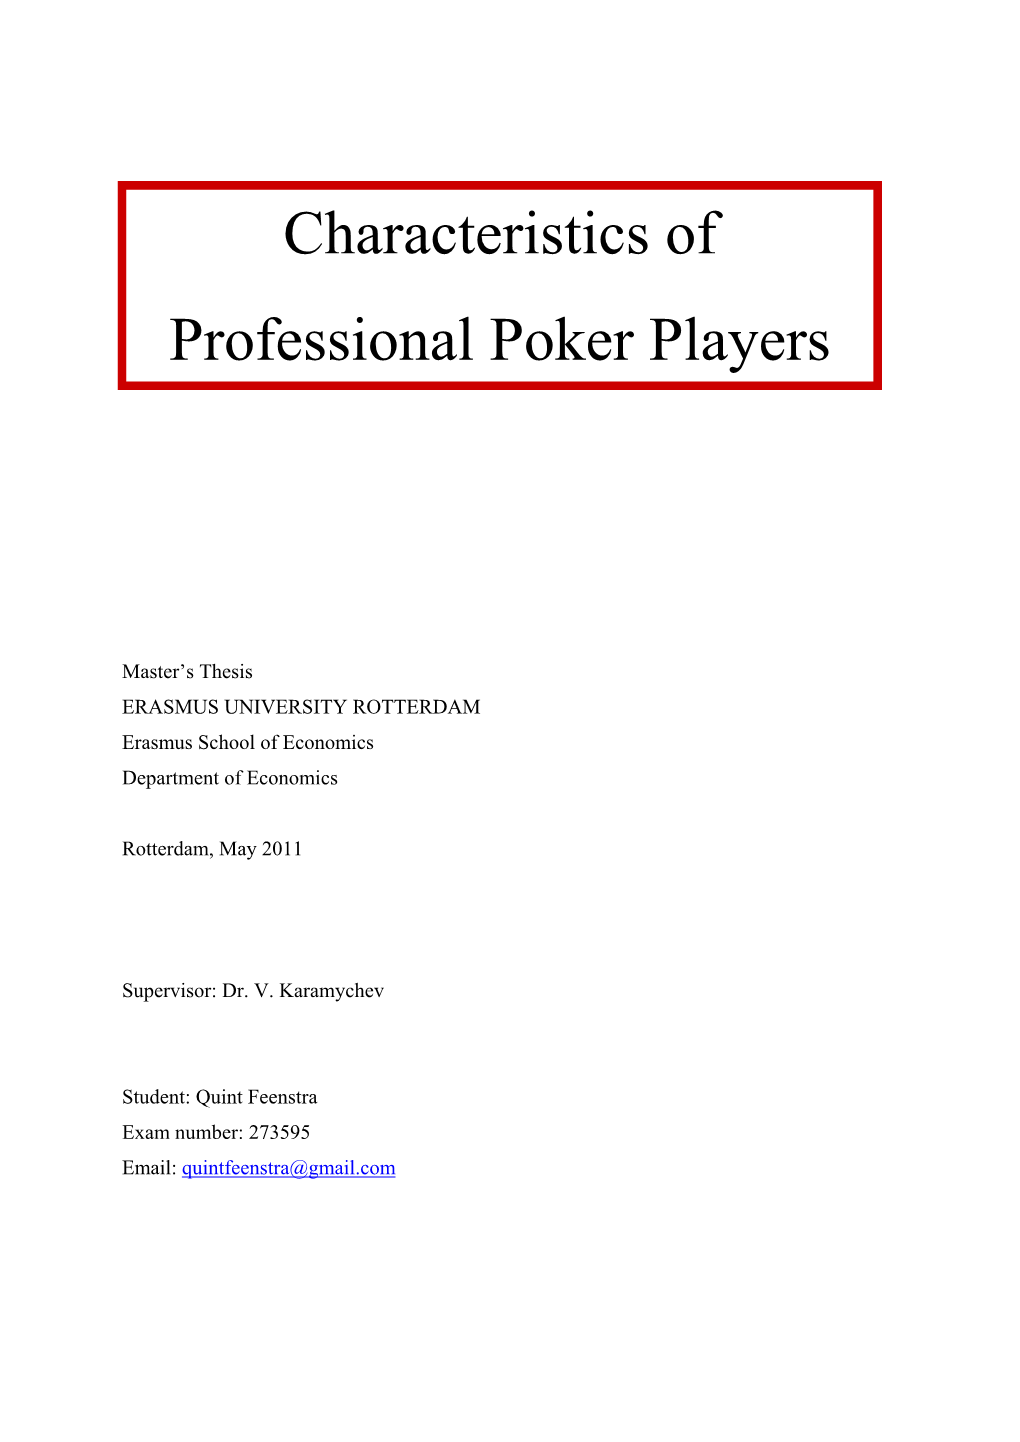 Characteristics of Professional Poker Players, a Field Study Was Conducted